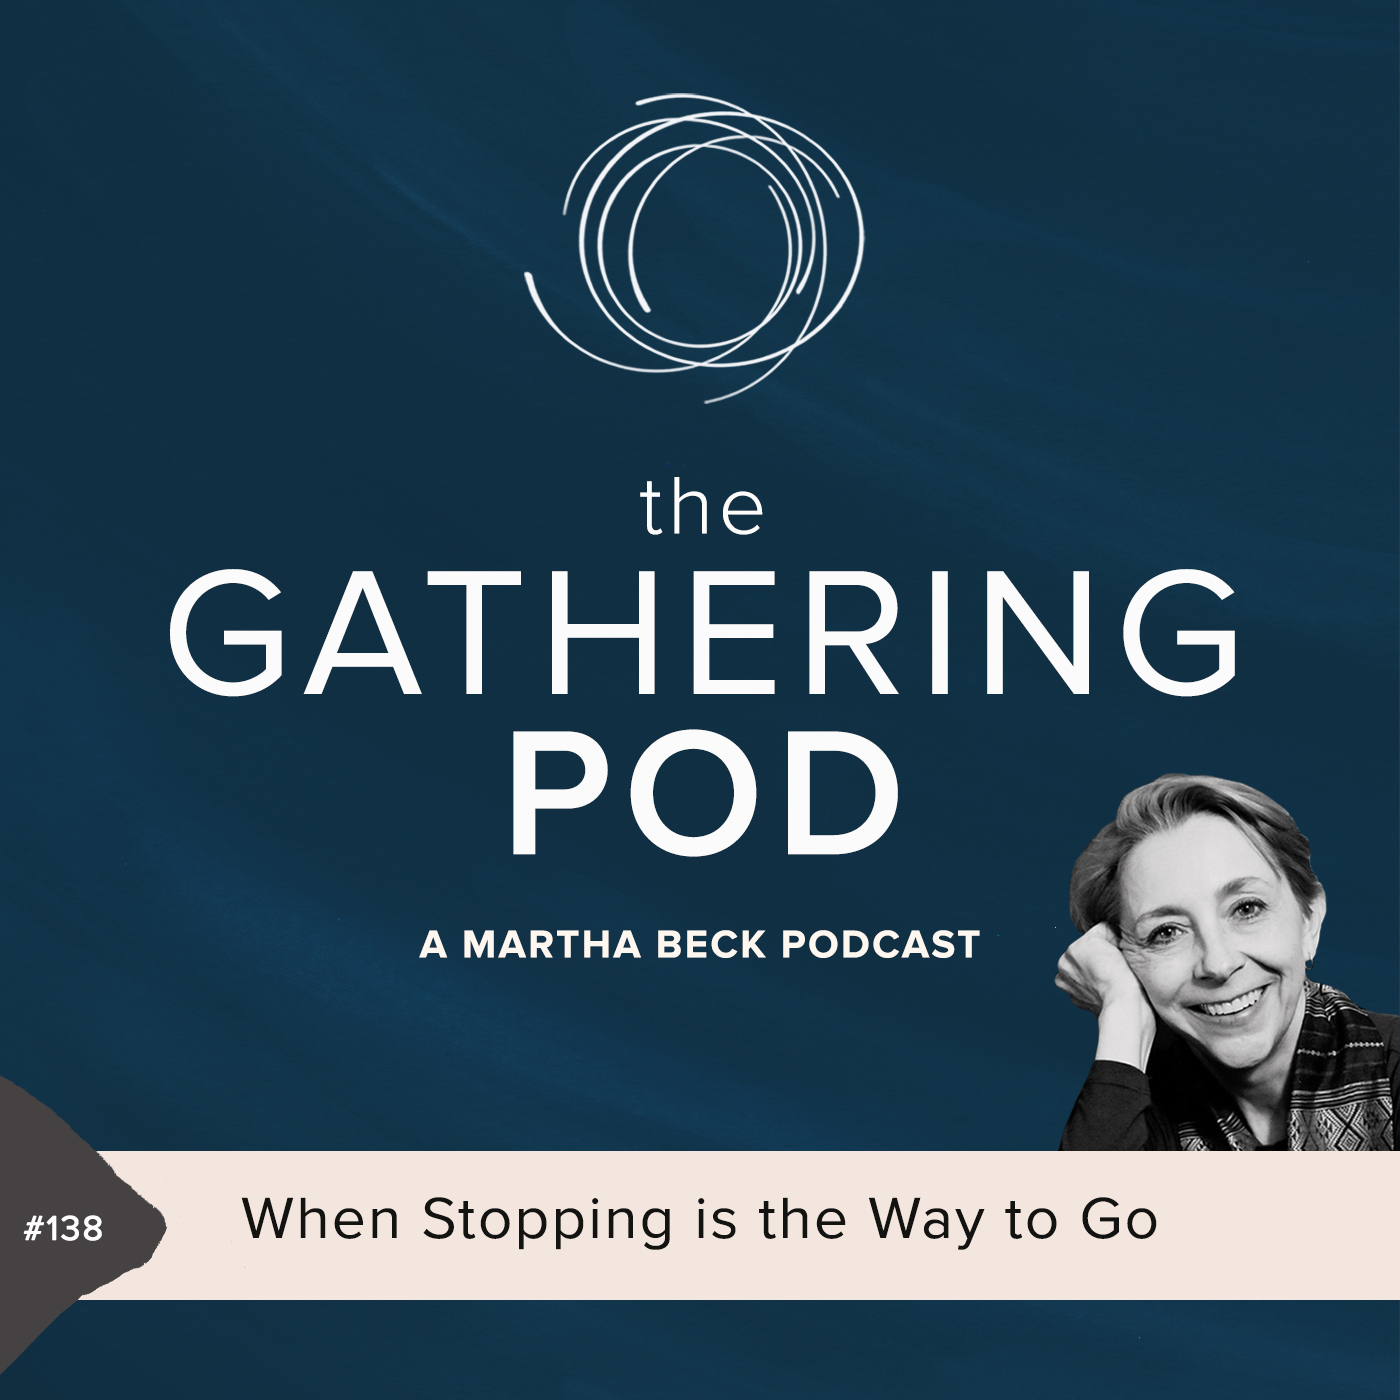 Image for The Gathering Pod A Martha Beck Podcast Episode #138 When Stopping is the Way to Go